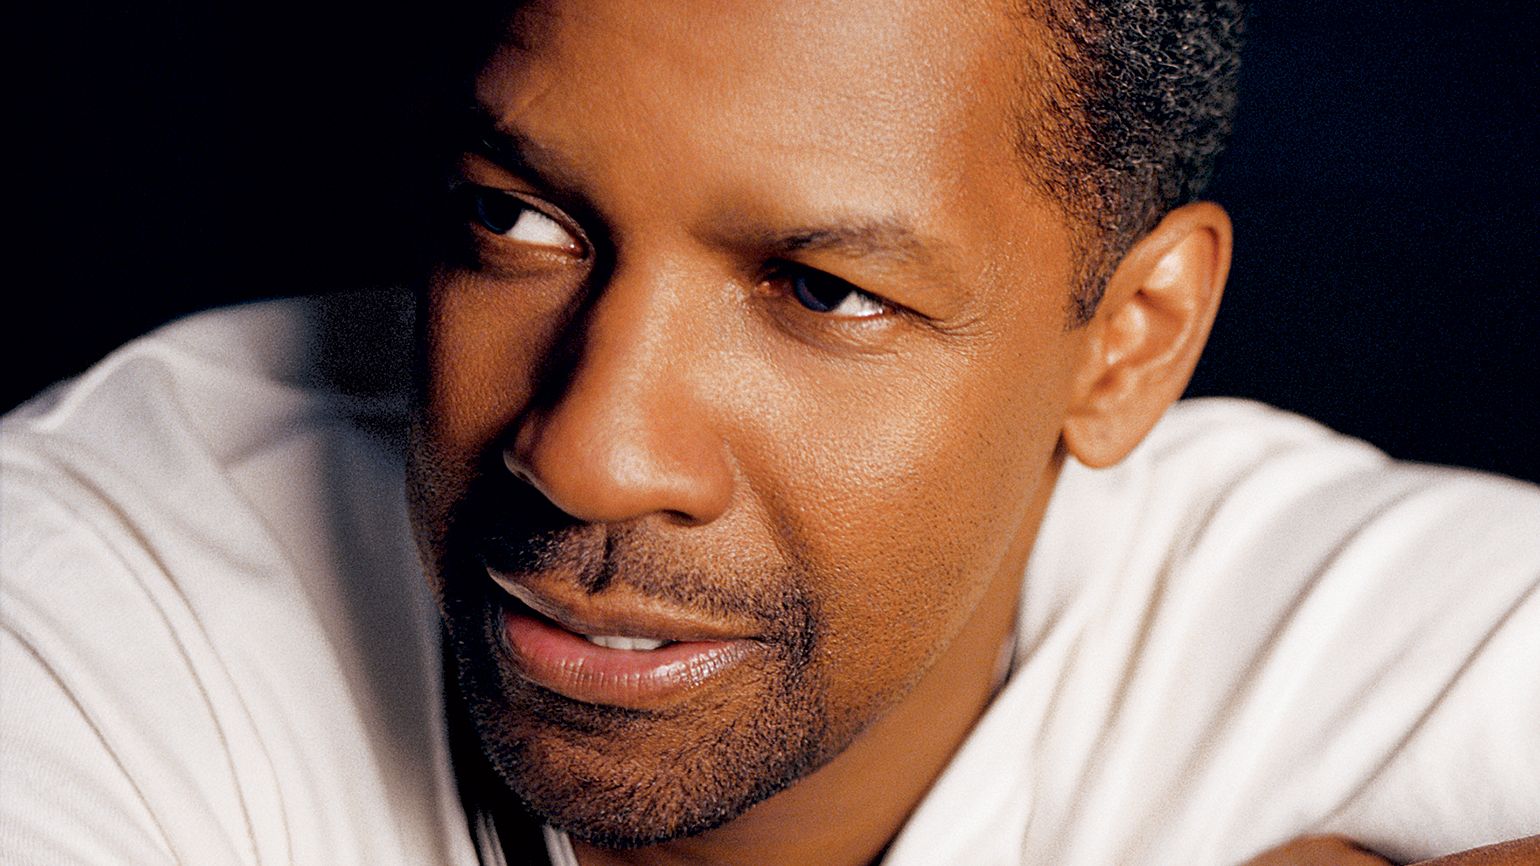 My Father Told Me - Denzel Washington Quotes